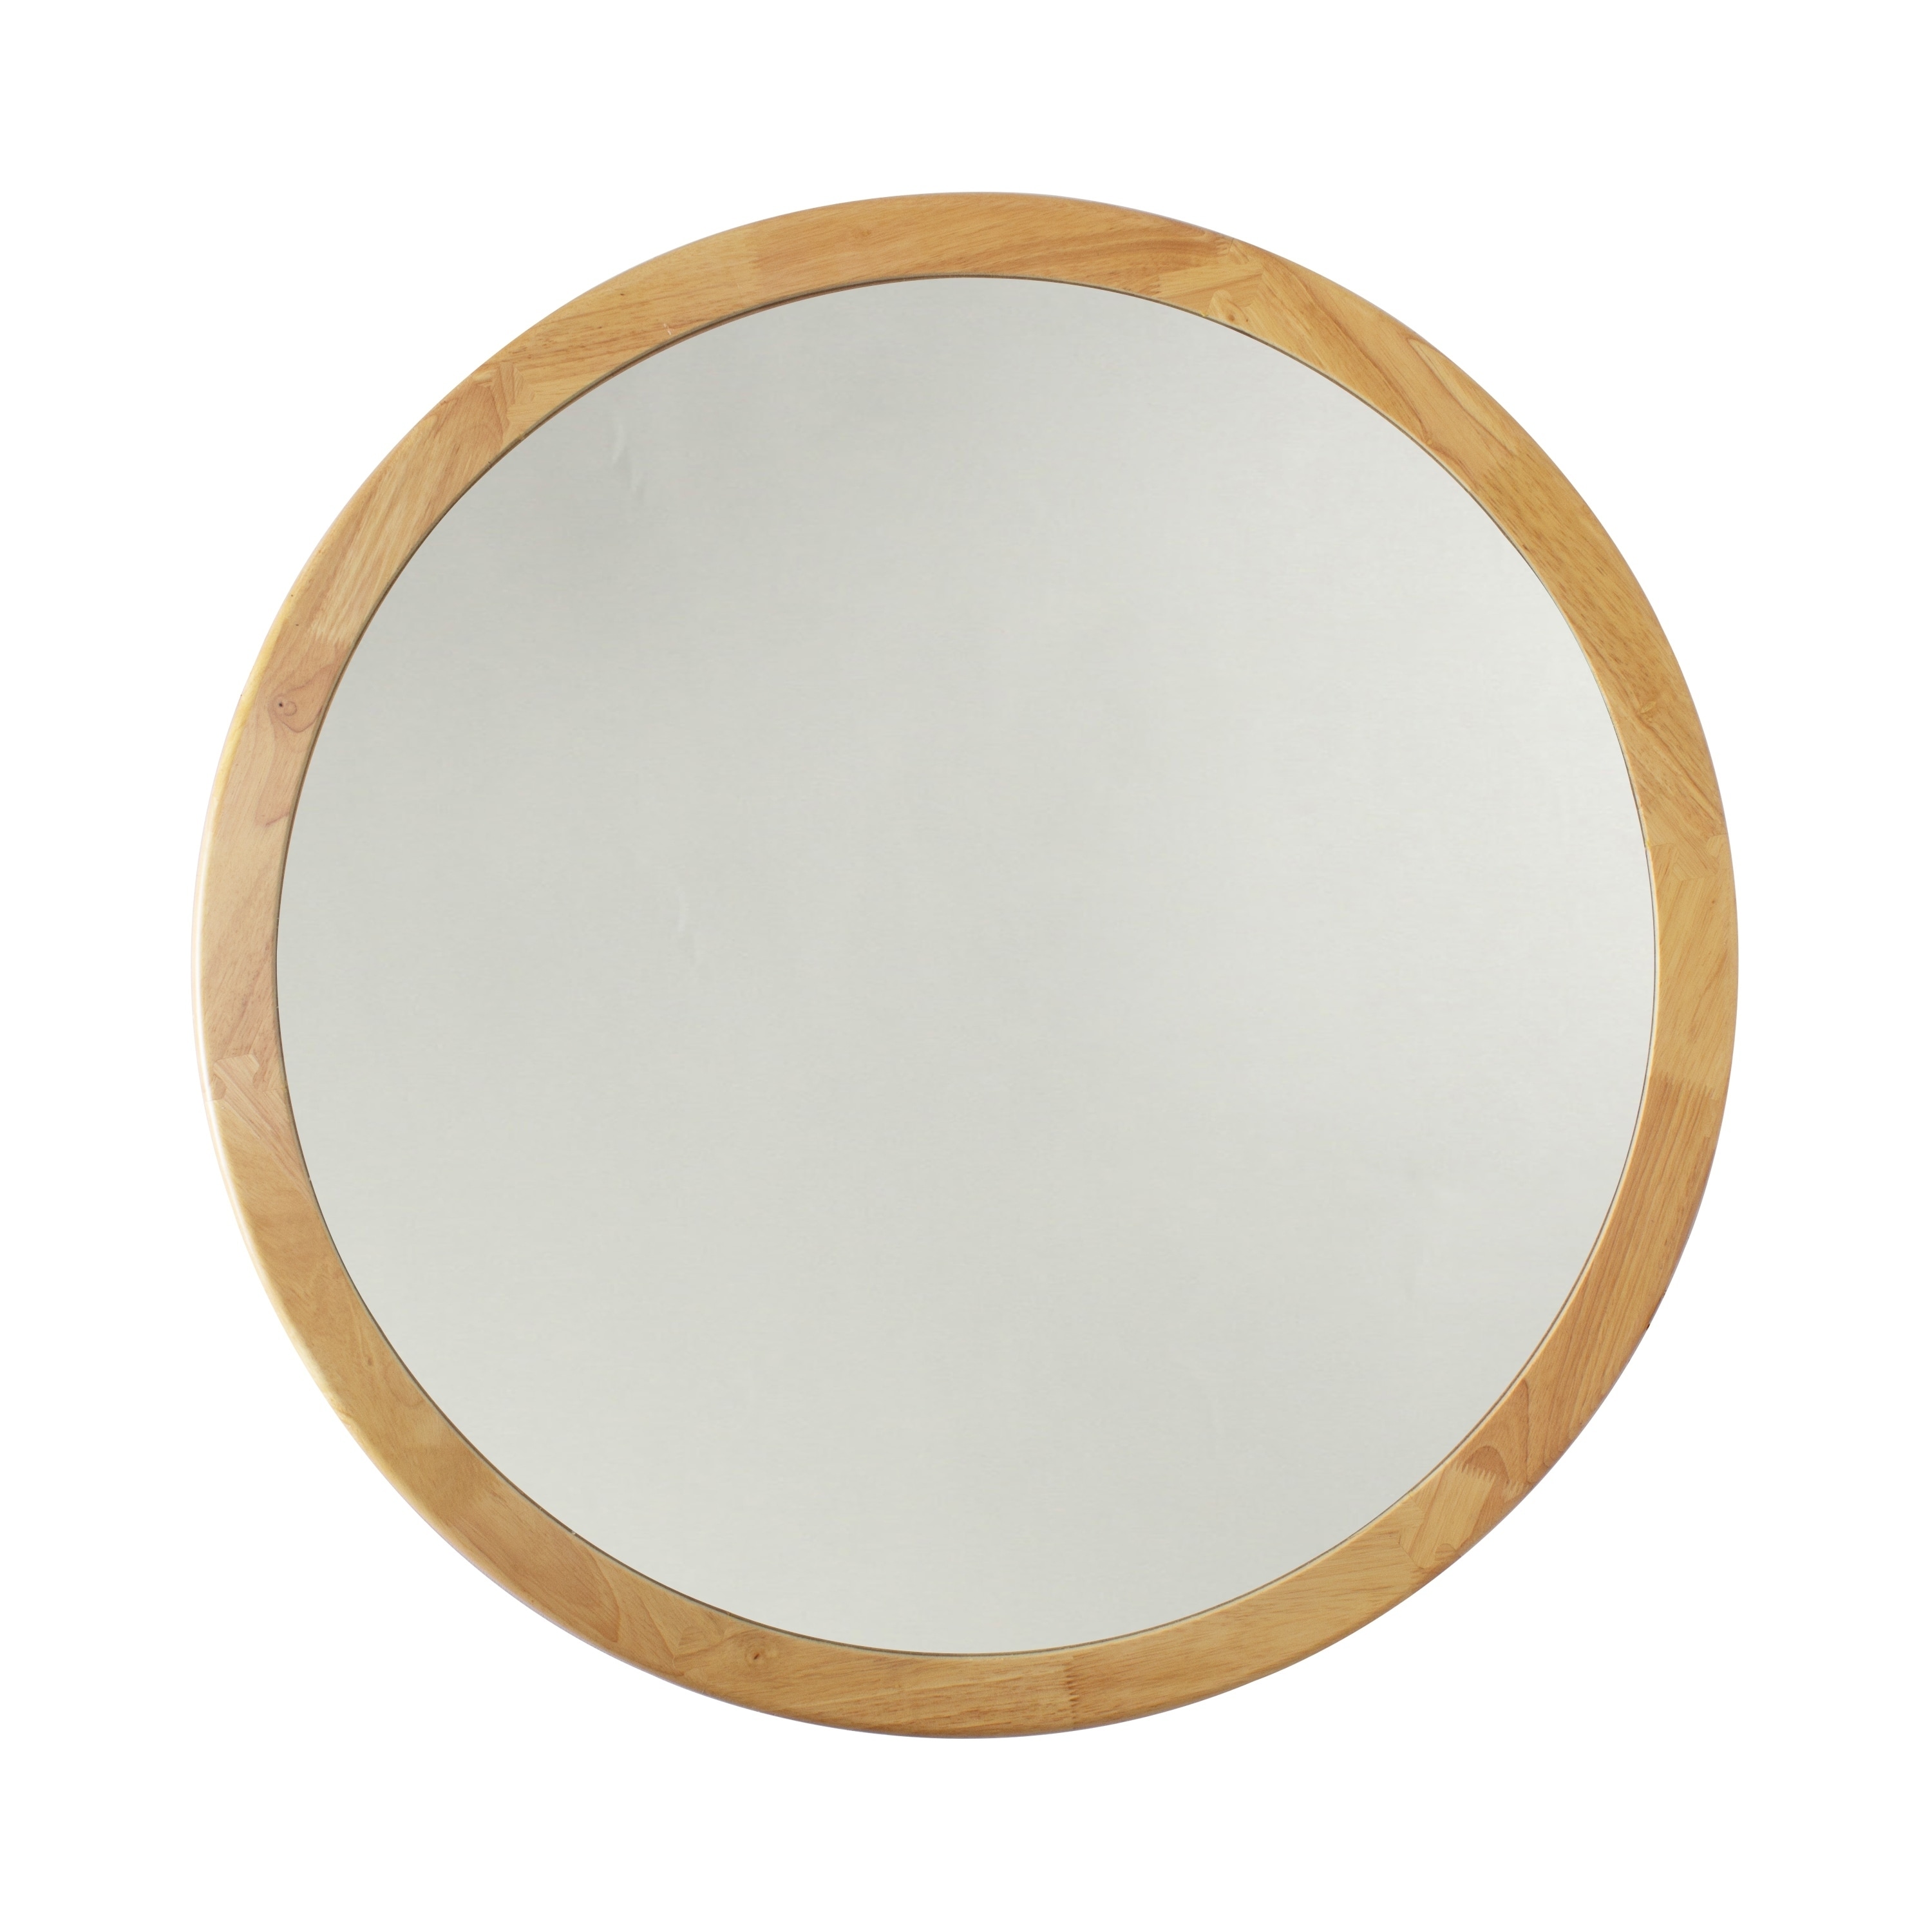 Carson Carrington Salungen Maple Wall-mounted Round Accent Mirror On Sale  Bed Bath  Beyond 29869540